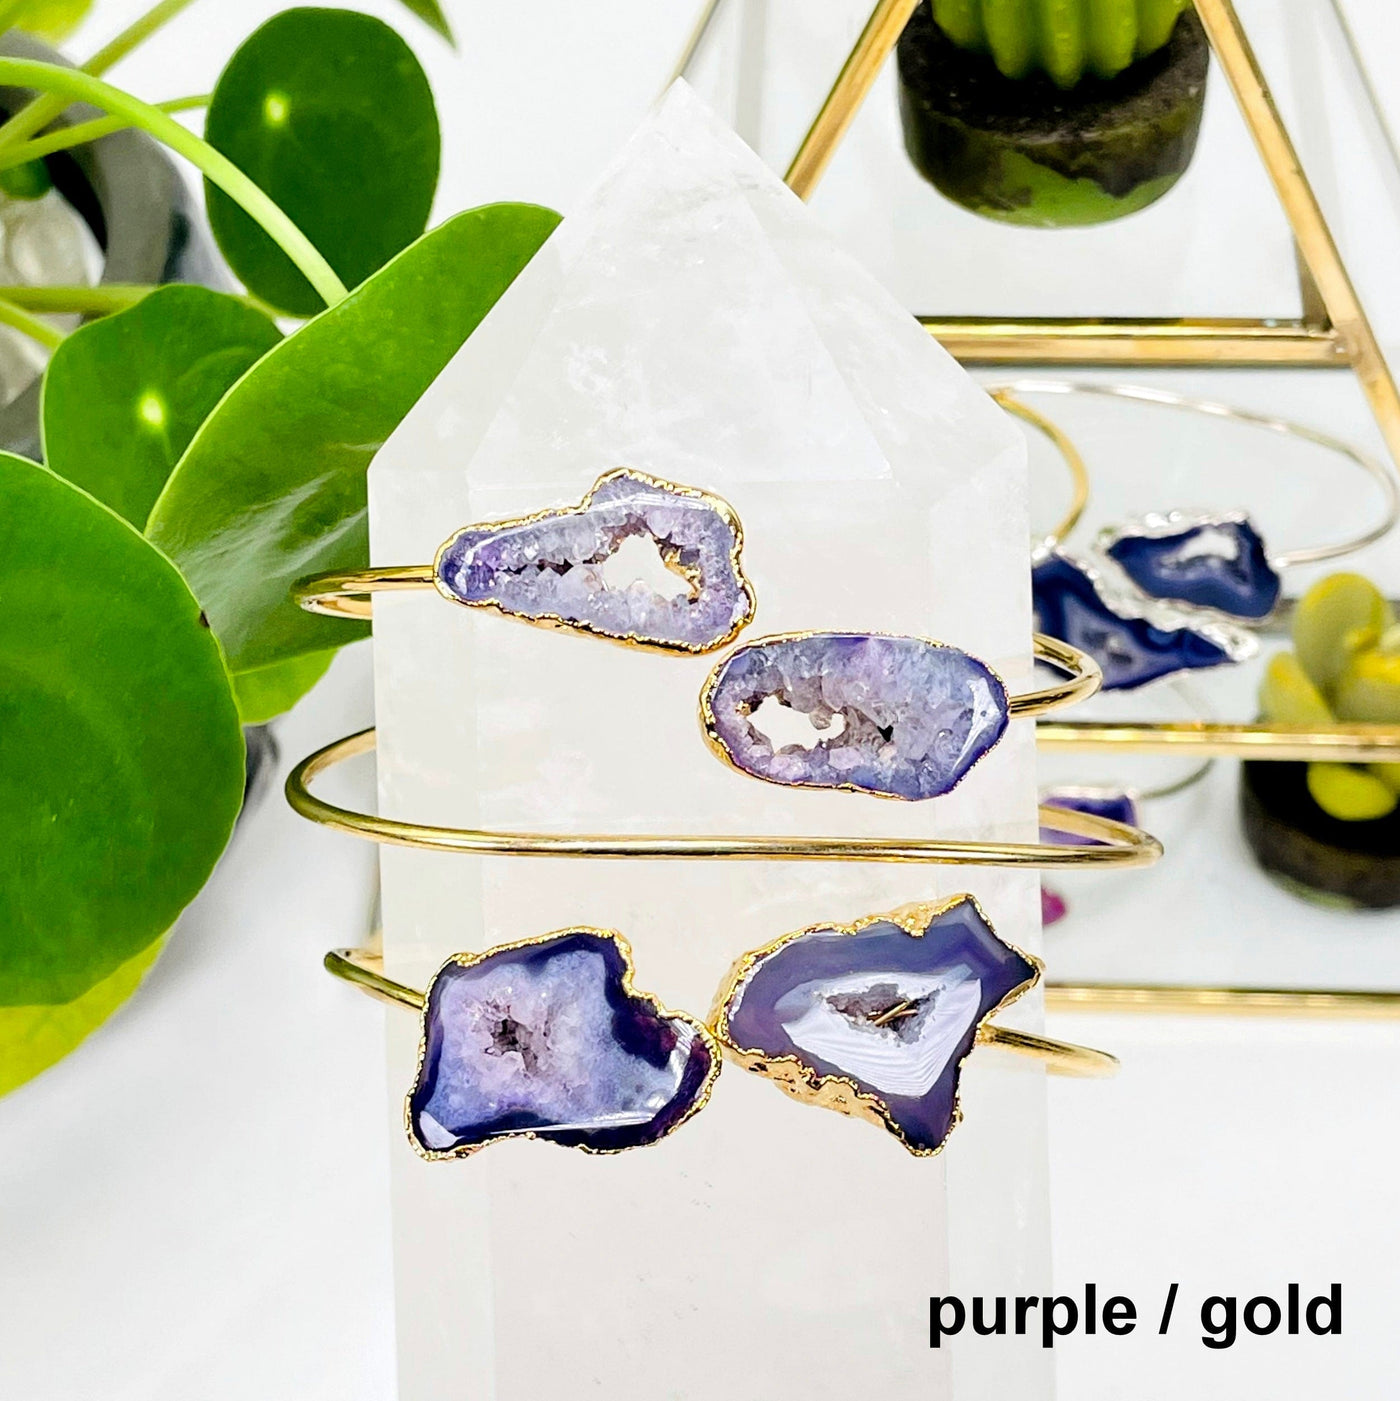 two purple / gold double agate adjustable bracelets facing forward and one facing backwards on a crystal quartz point in front of background decorations